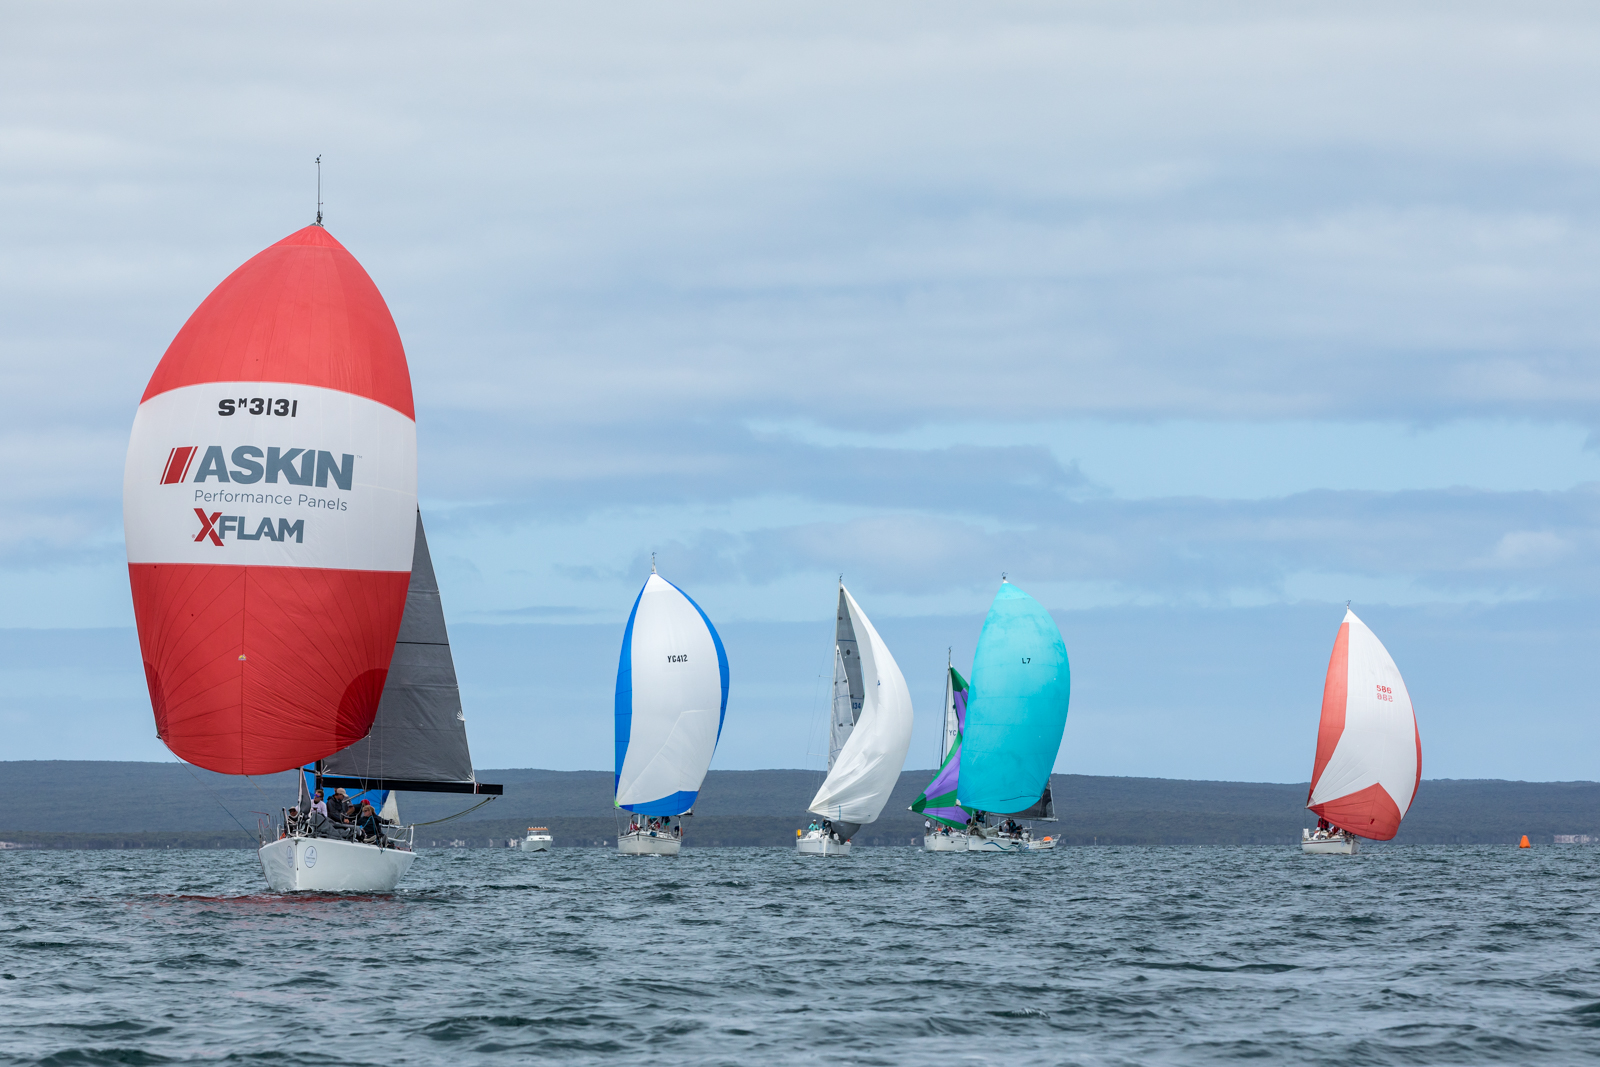 Division two racing on Boston Bay. Photos: Take 2 Photography